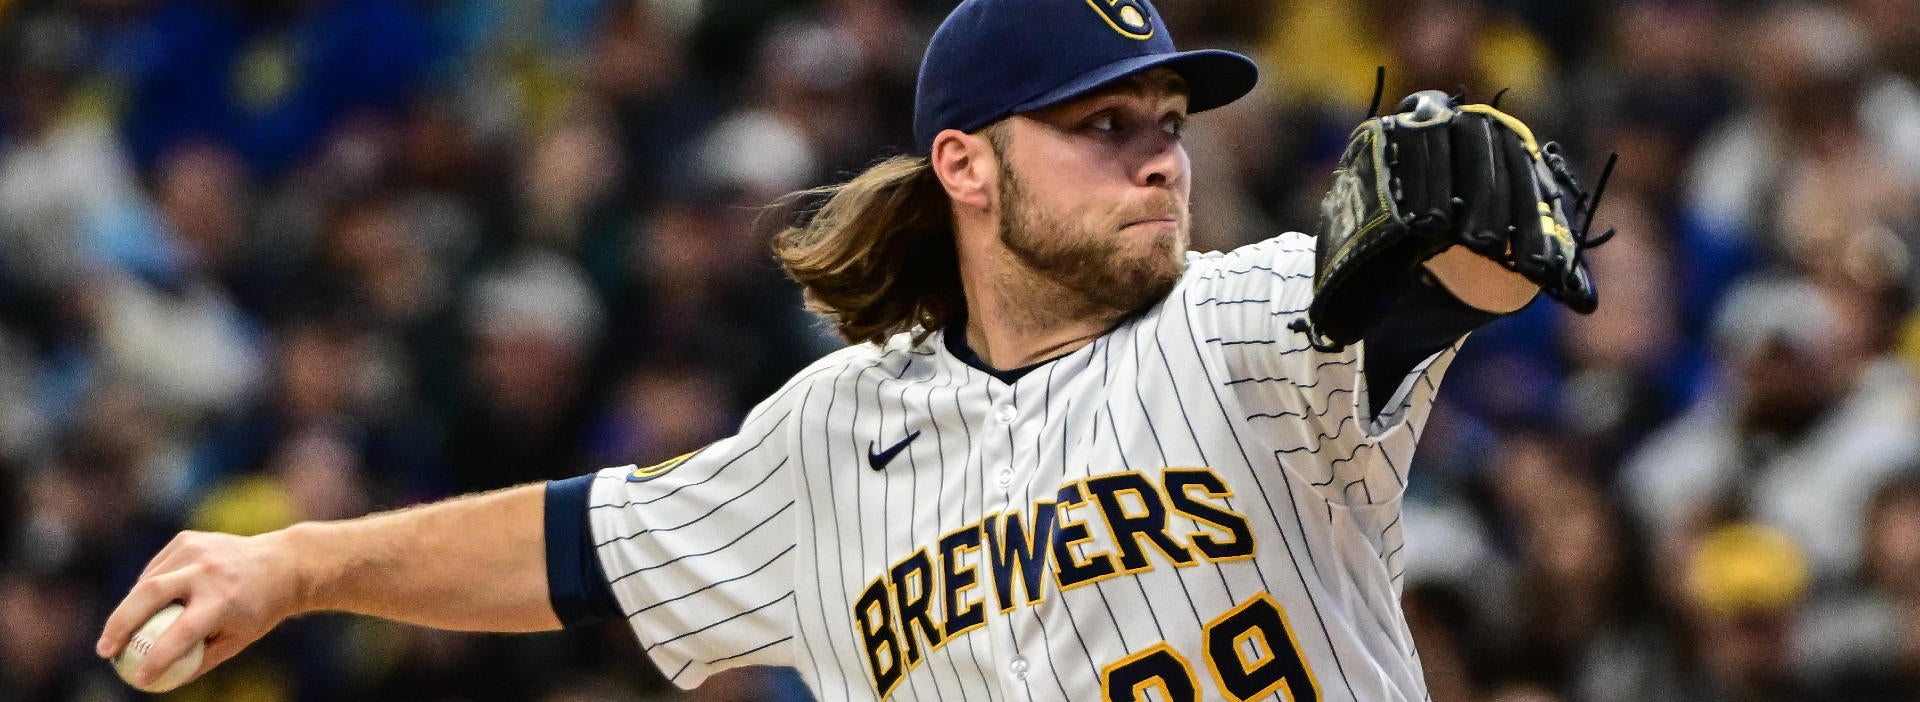 Diamondbacks vs. Brewers odds, picks: Advanced computer MLB model releases selections for NL Wild Card Game 1 matchup